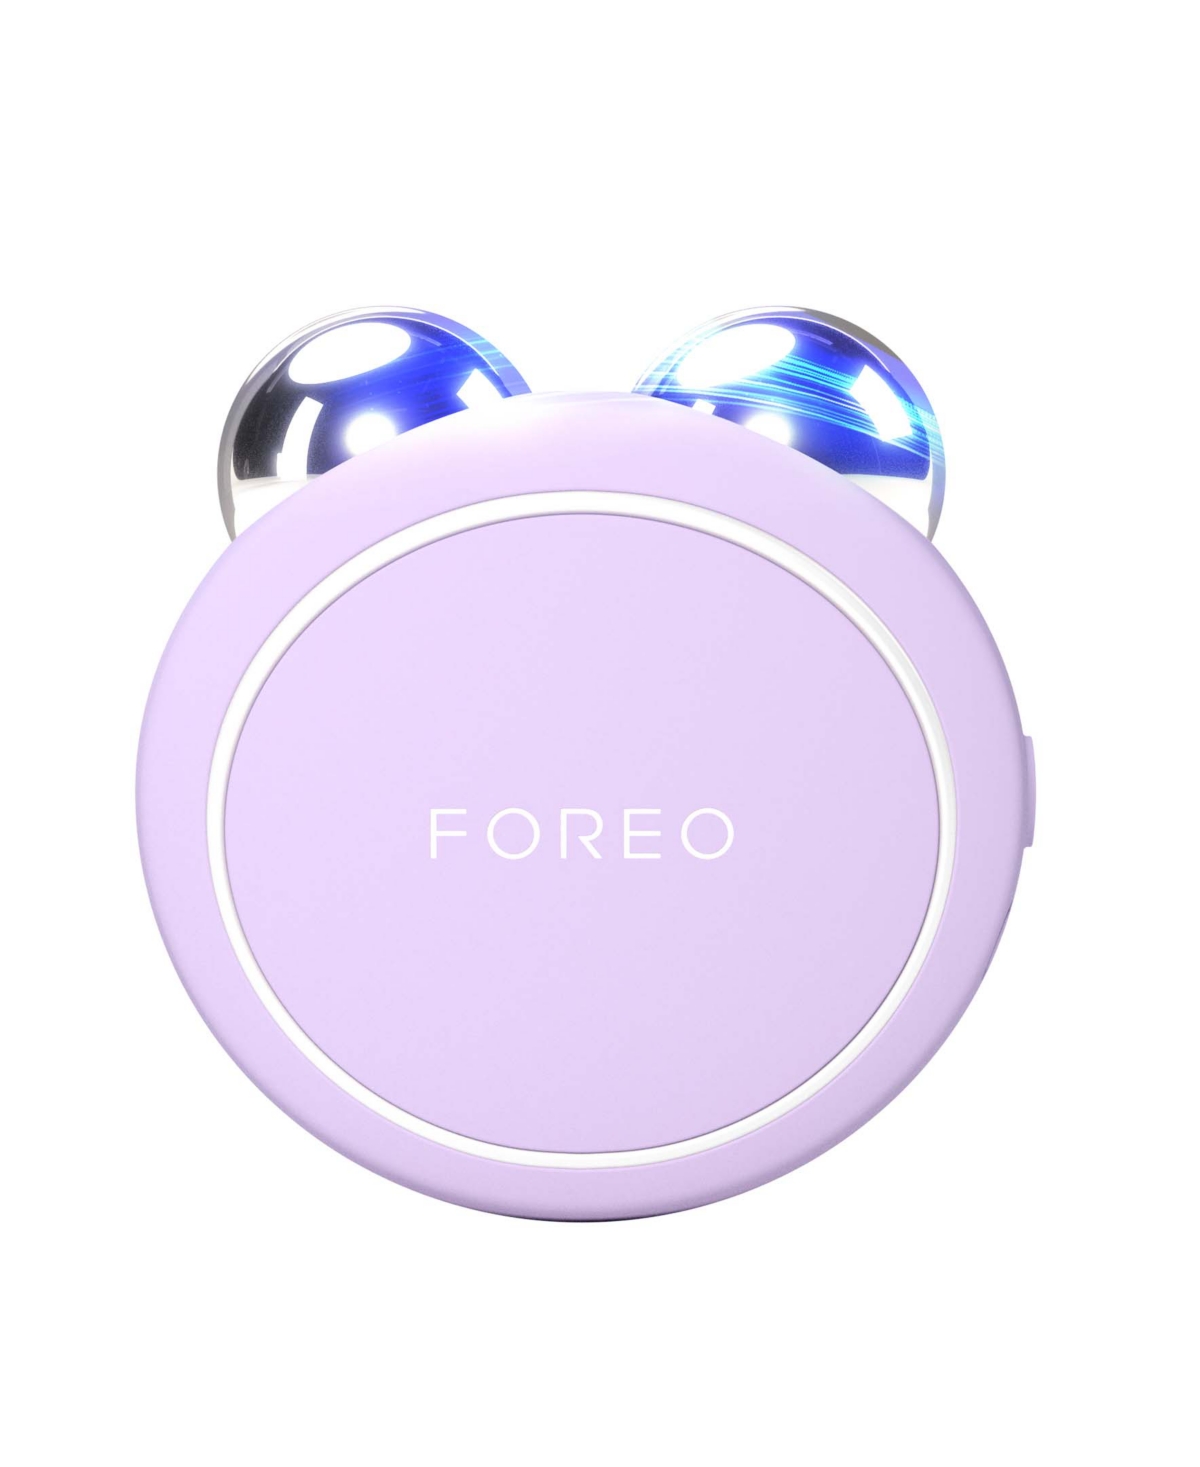 Foreo Bear 2 Go Targeted Microcurrent Facial Toning Device In White